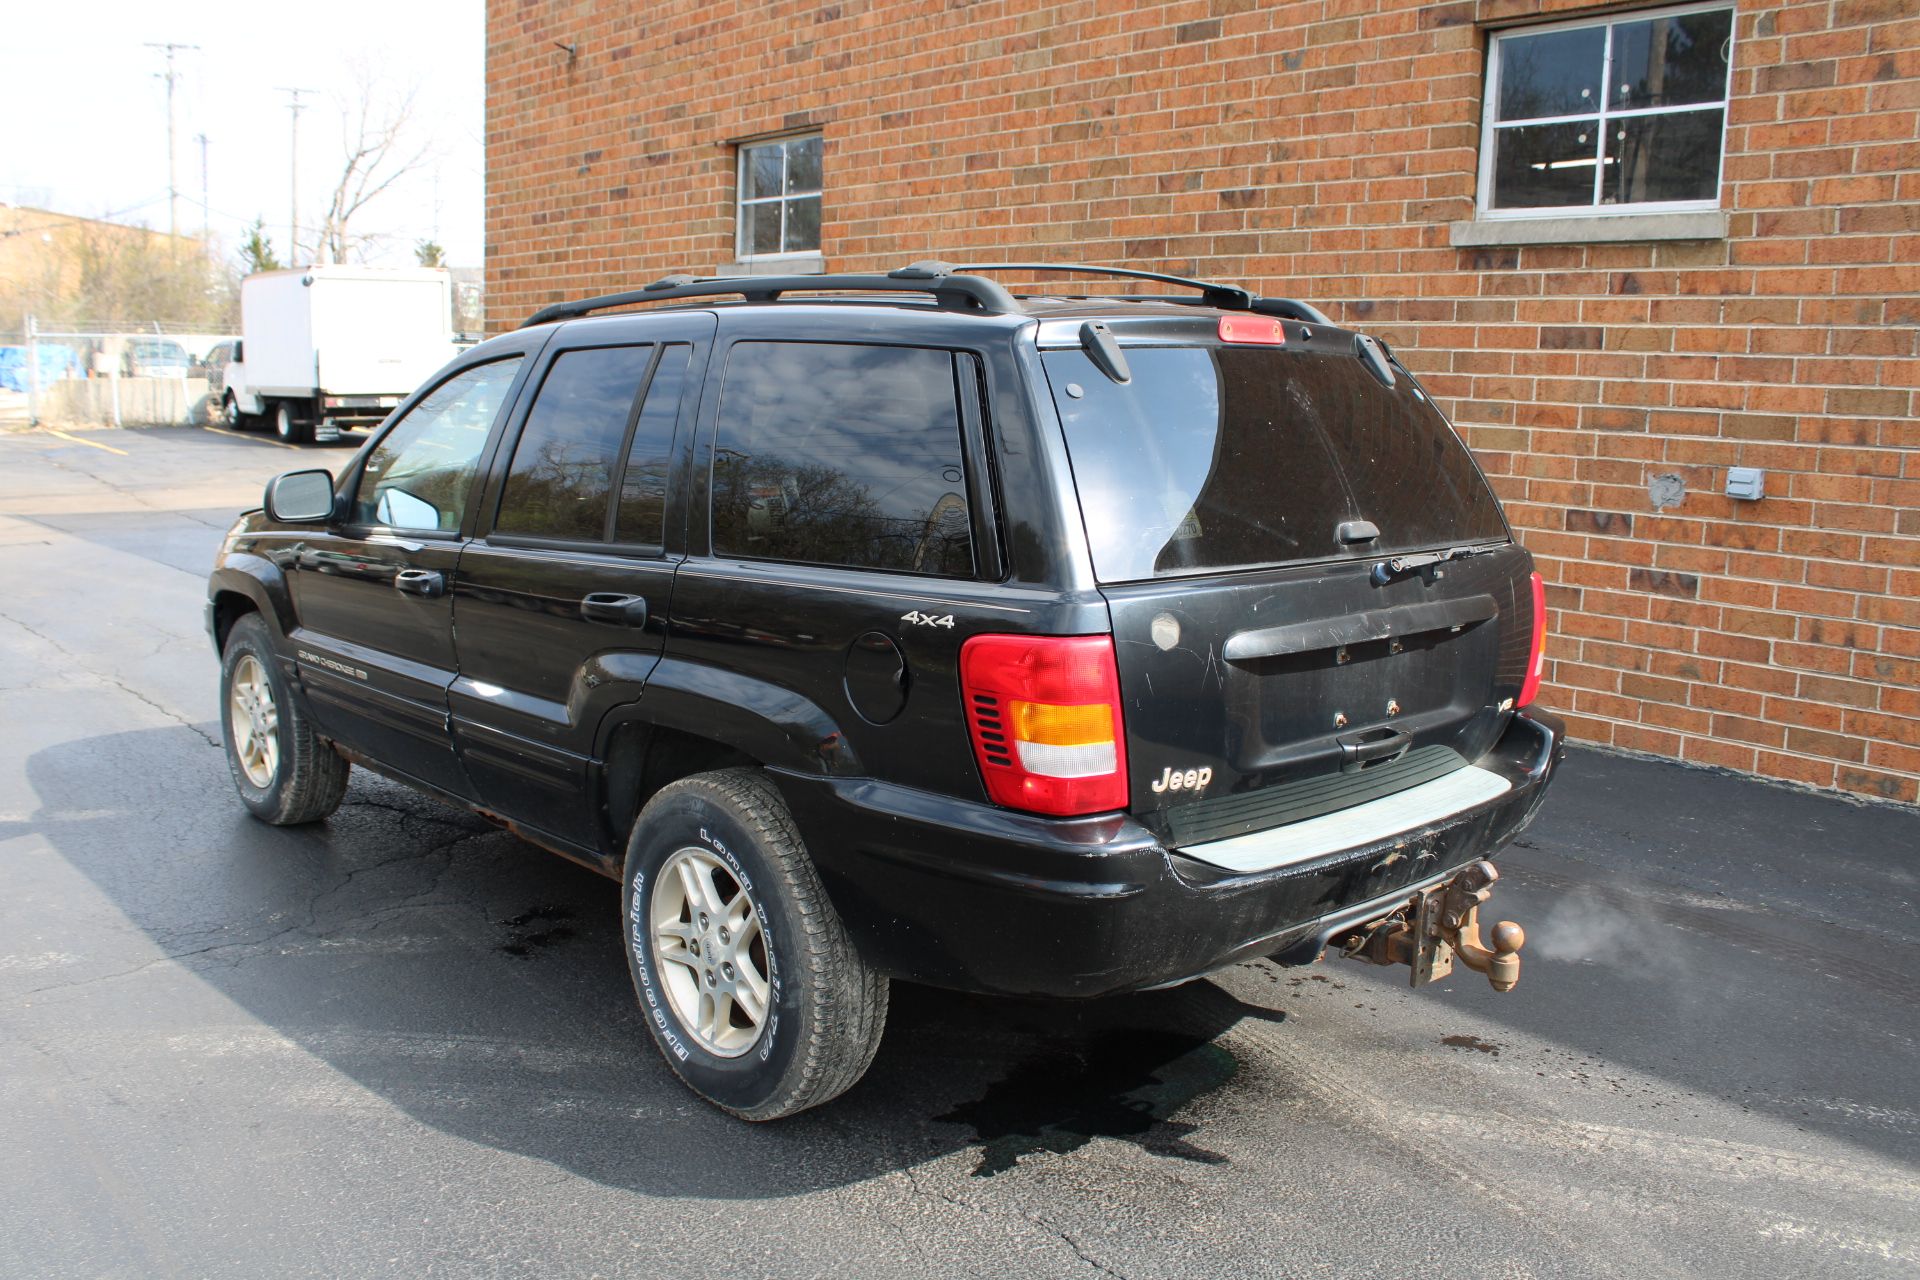 1999 JEEP GRAND CHEROKEE LIMITED, 4WD, 4.7L V-8,VIN 1J4GW68N5XC579232, 107,352 MILES ON ODOMETER, - Image 2 of 9